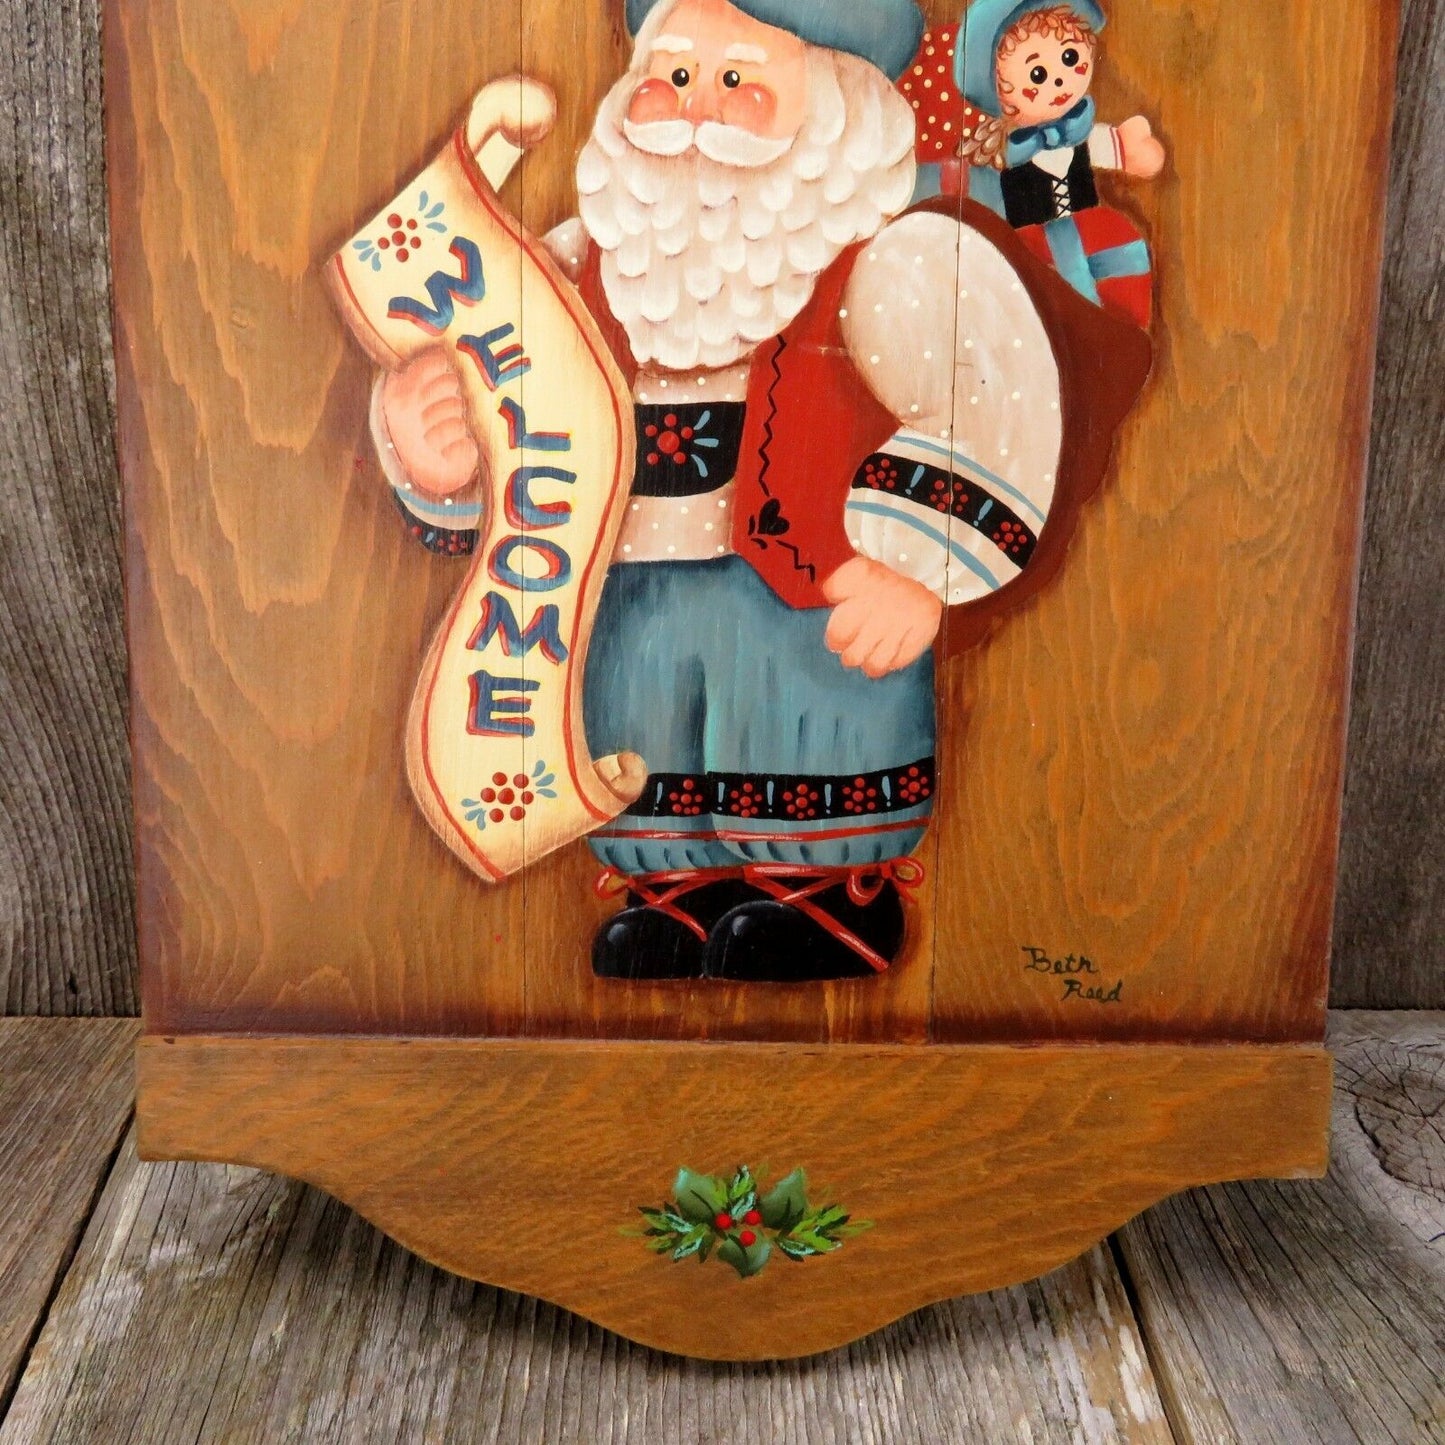 Vintage Wood Welcome Sign Santa Christmas Old World Tole Painted Decoration - At Grandma's Table